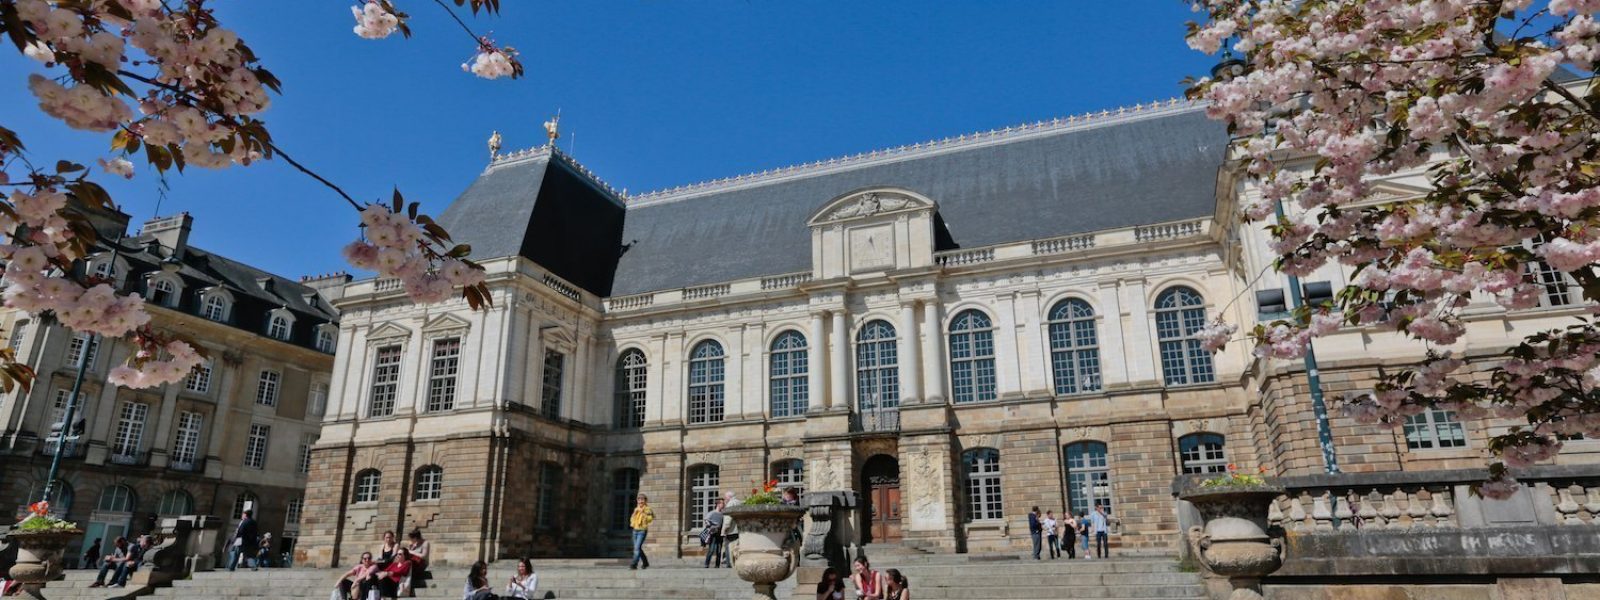 The Parliament of Brittany in Rennes